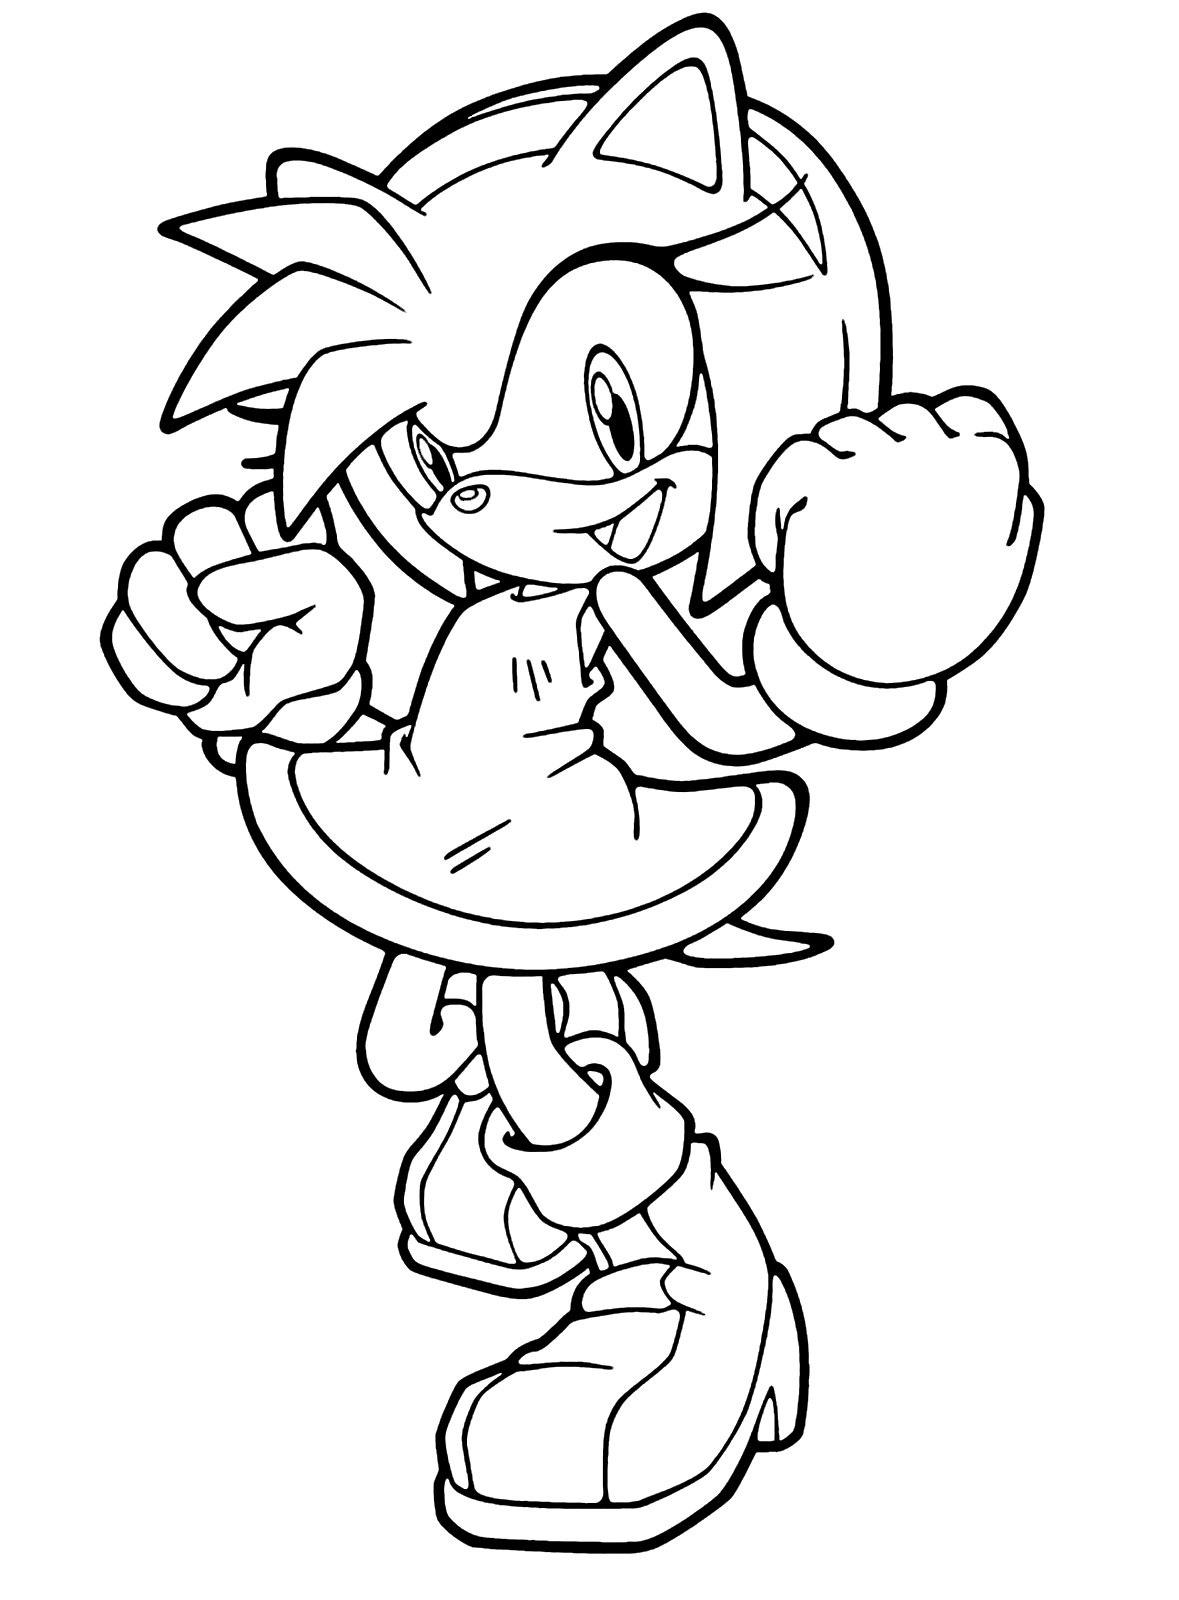 Amy Rose coloring sheet to print 